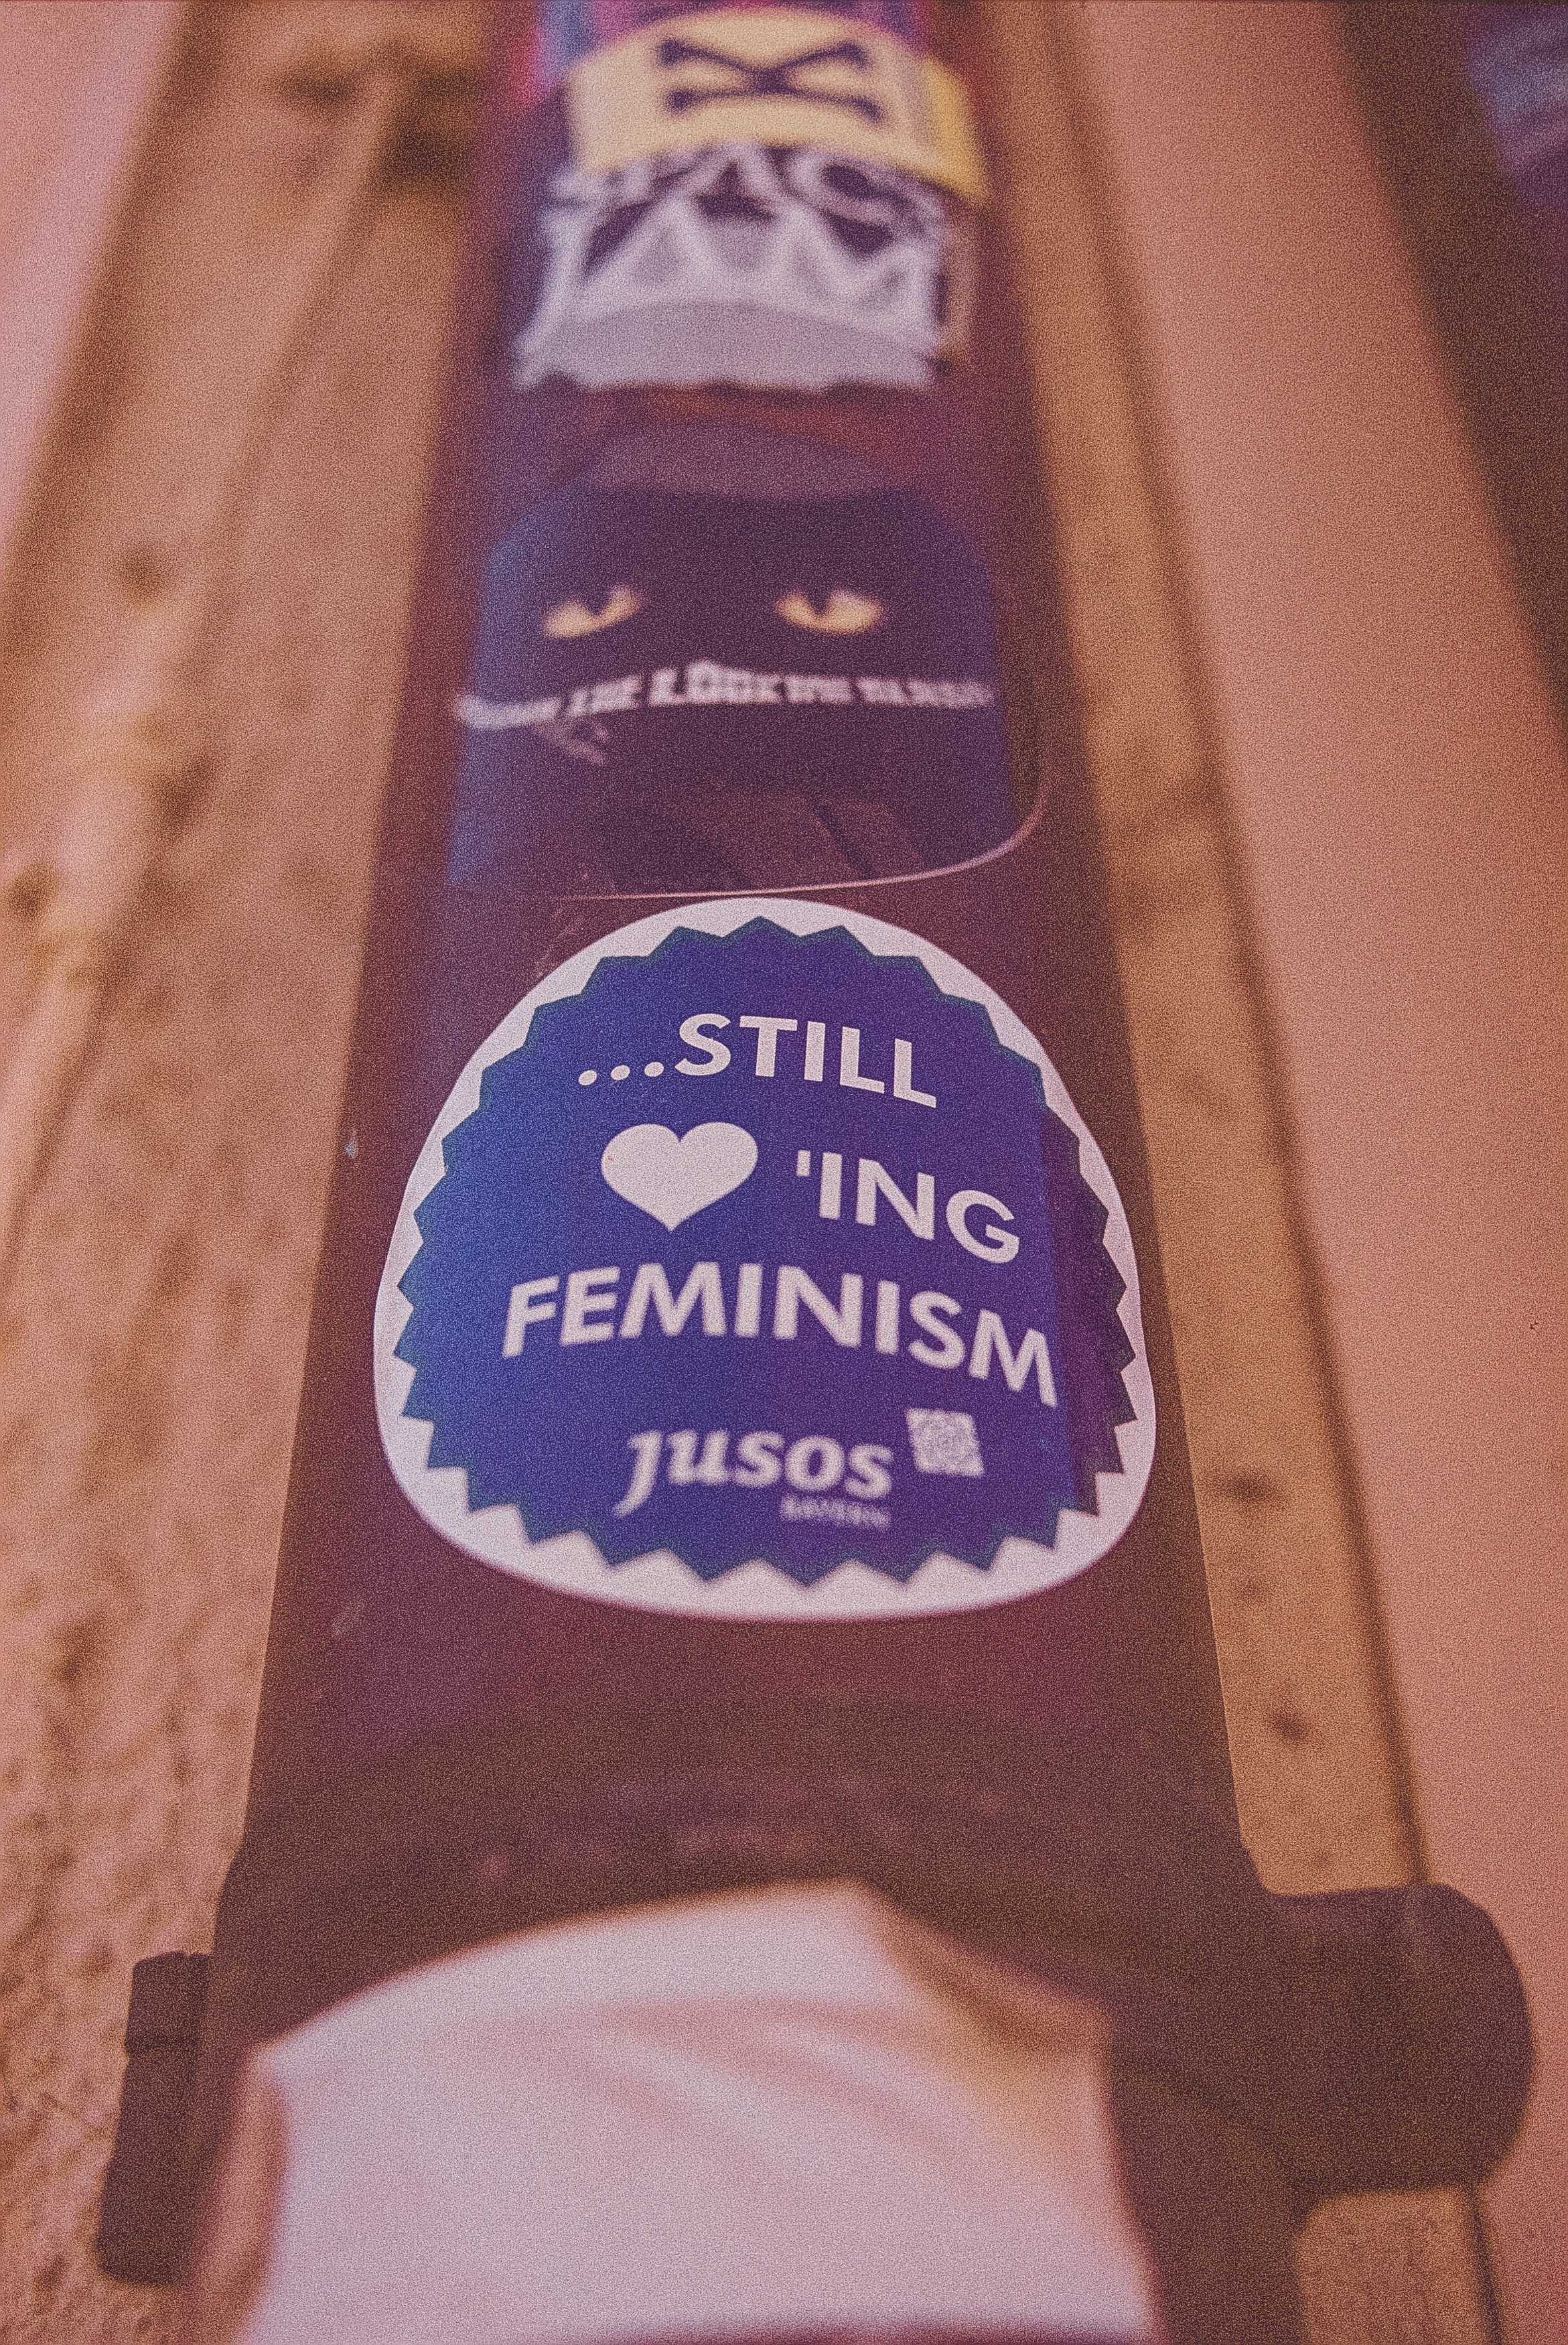 A image with an object that has Still Loving Feminism written on it